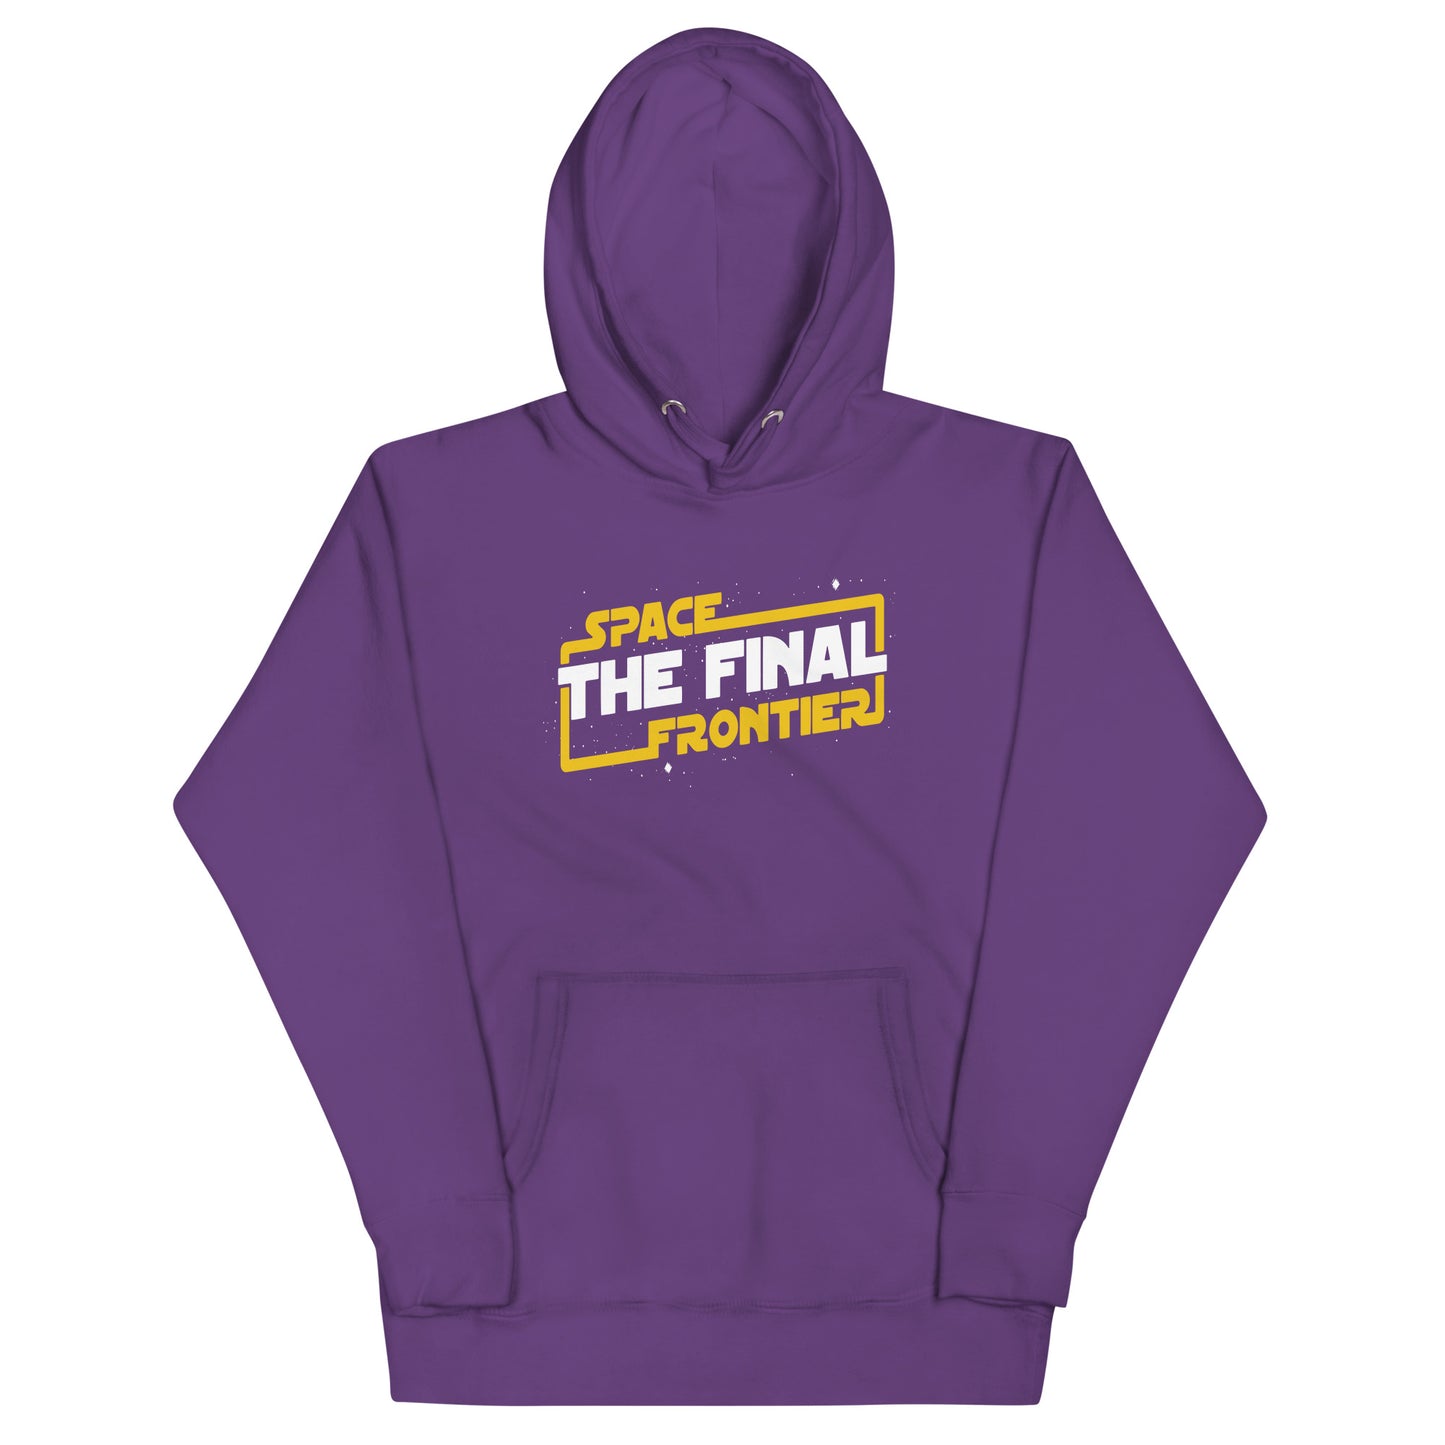 Space The Final Frontier Unisex Hoodie